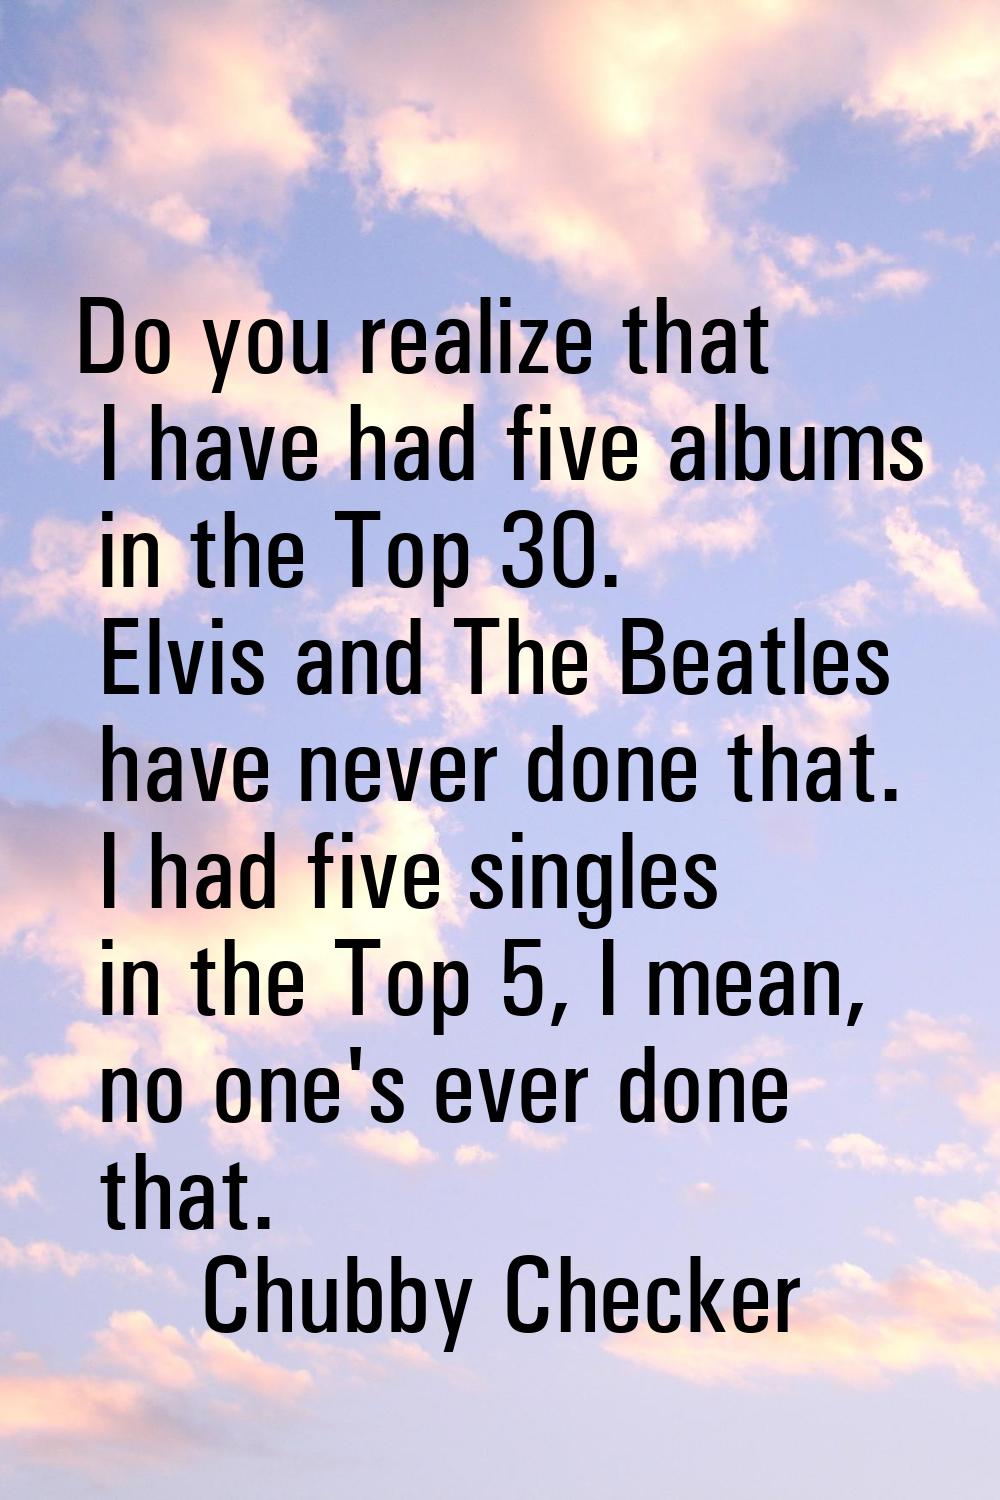 Do you realize that I have had five albums in the Top 30. Elvis and The Beatles have never done tha